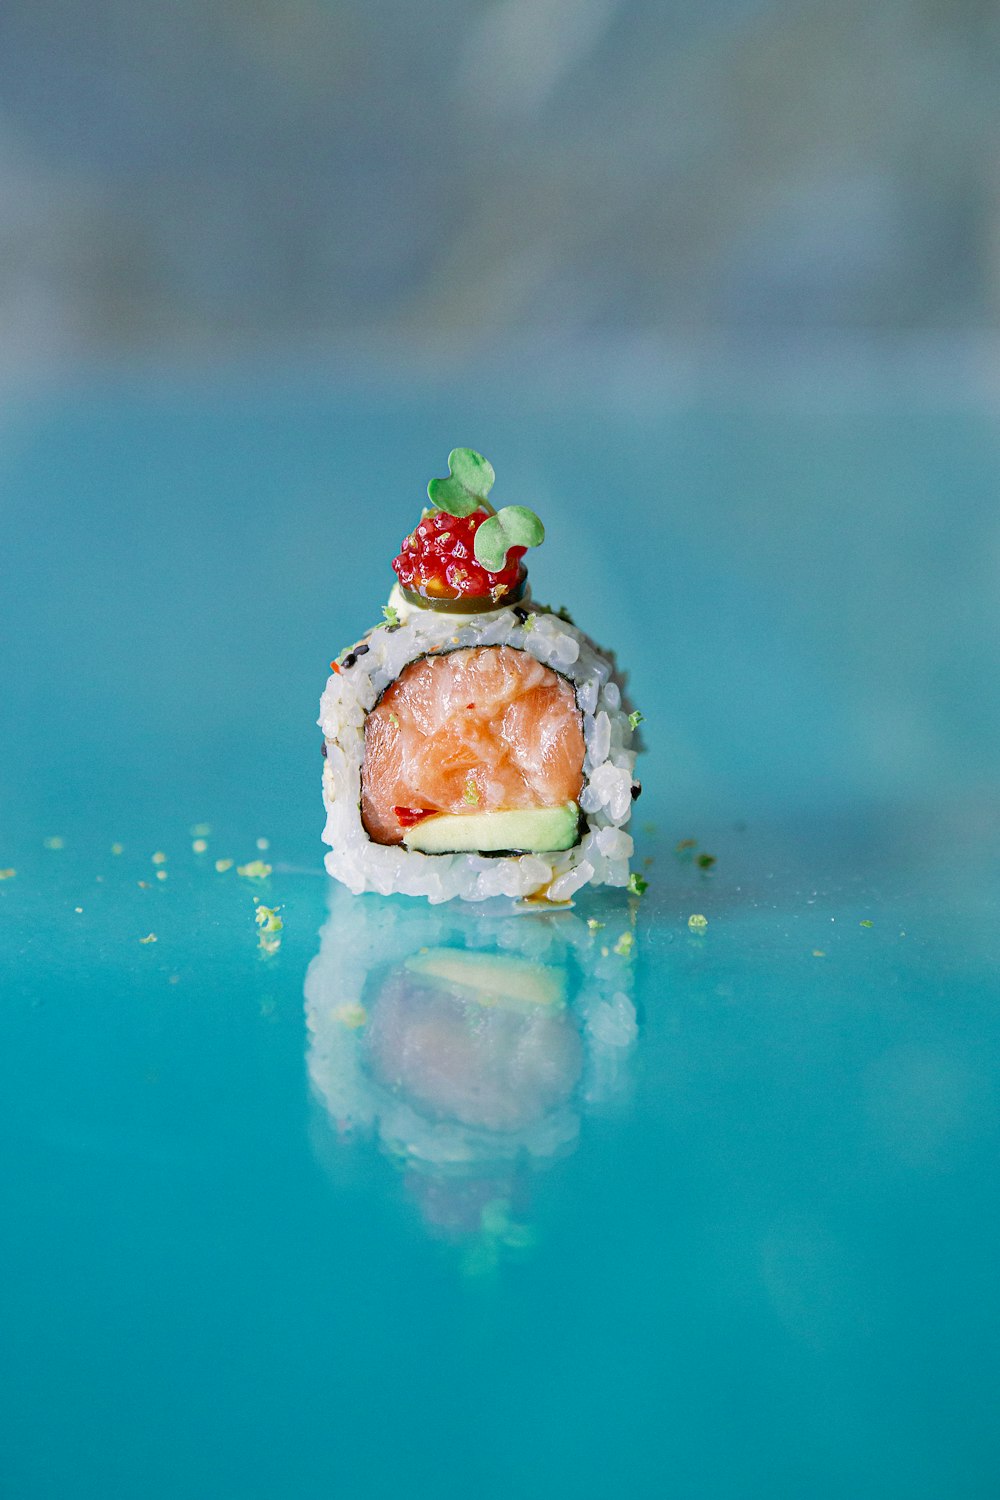 a close up of sushi